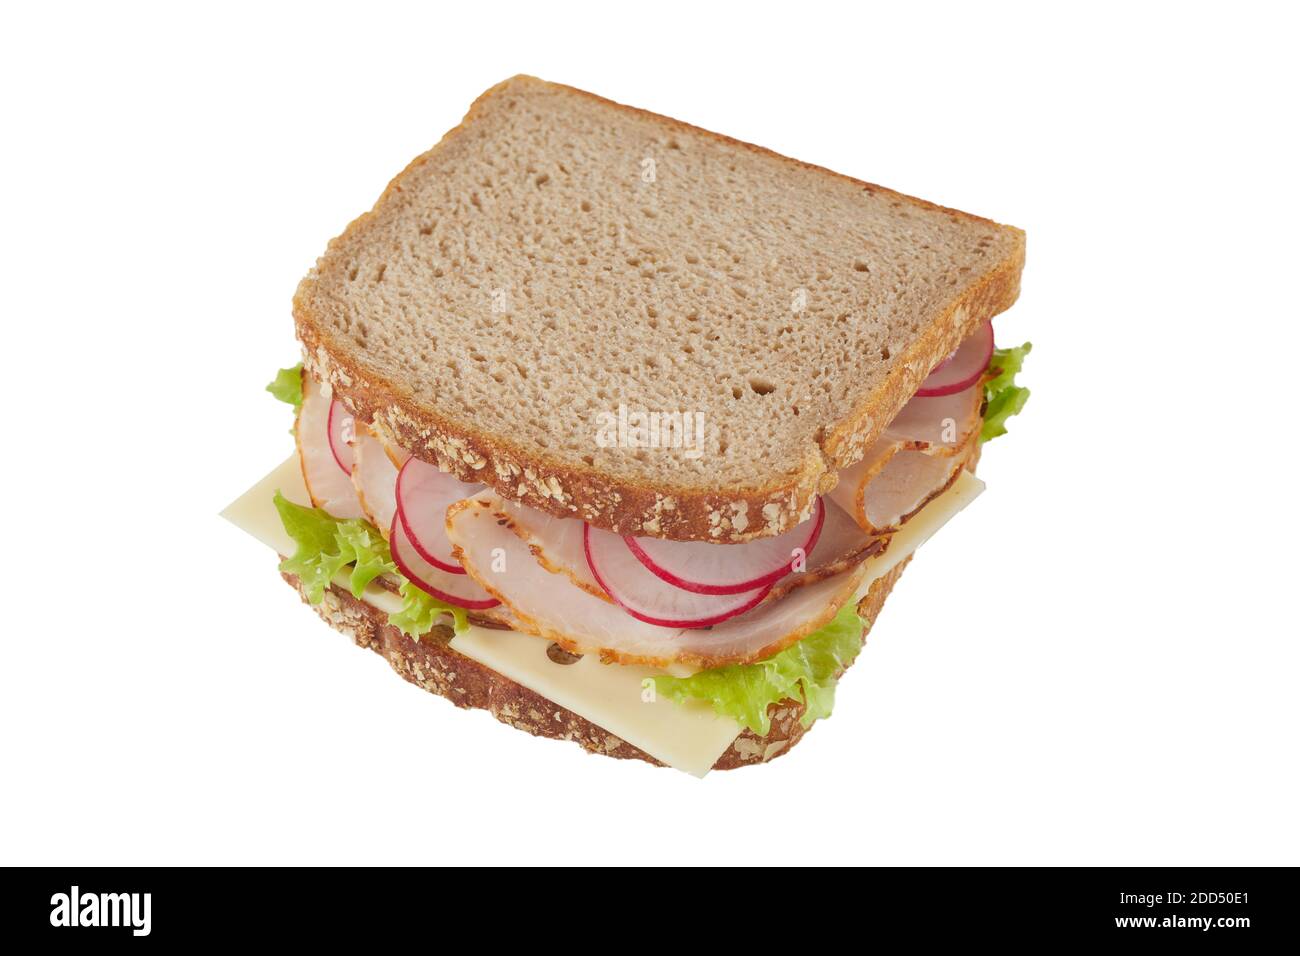 Healthy wholegrain sandwich with ham and cheese with radish and lettuce trimmings viewed high angle isolated on white Stock Photo